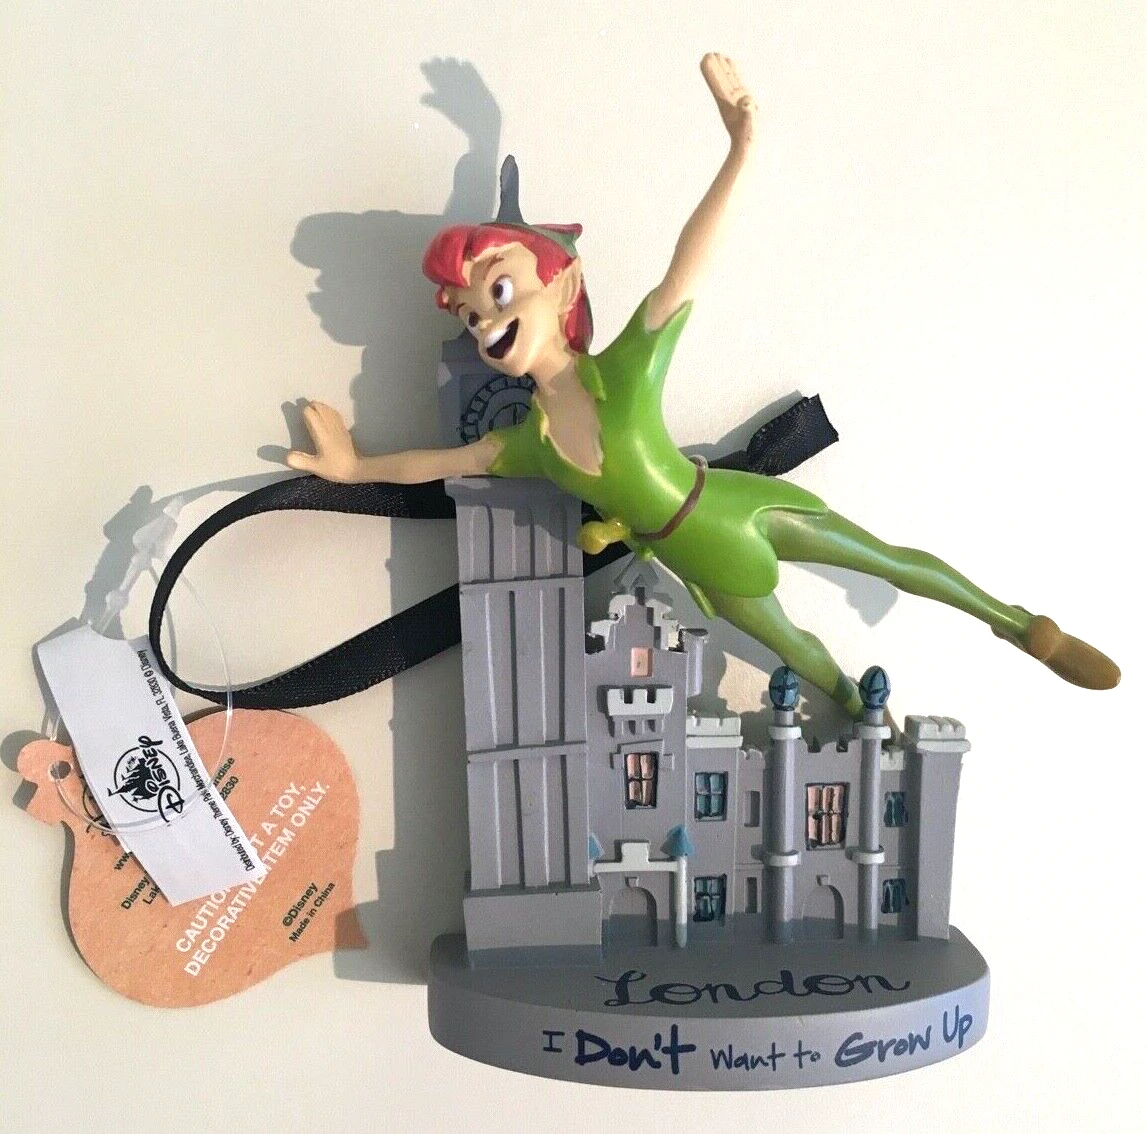 item Ornament - Peter Pan - I Don't want to Grow Up s-l1600png